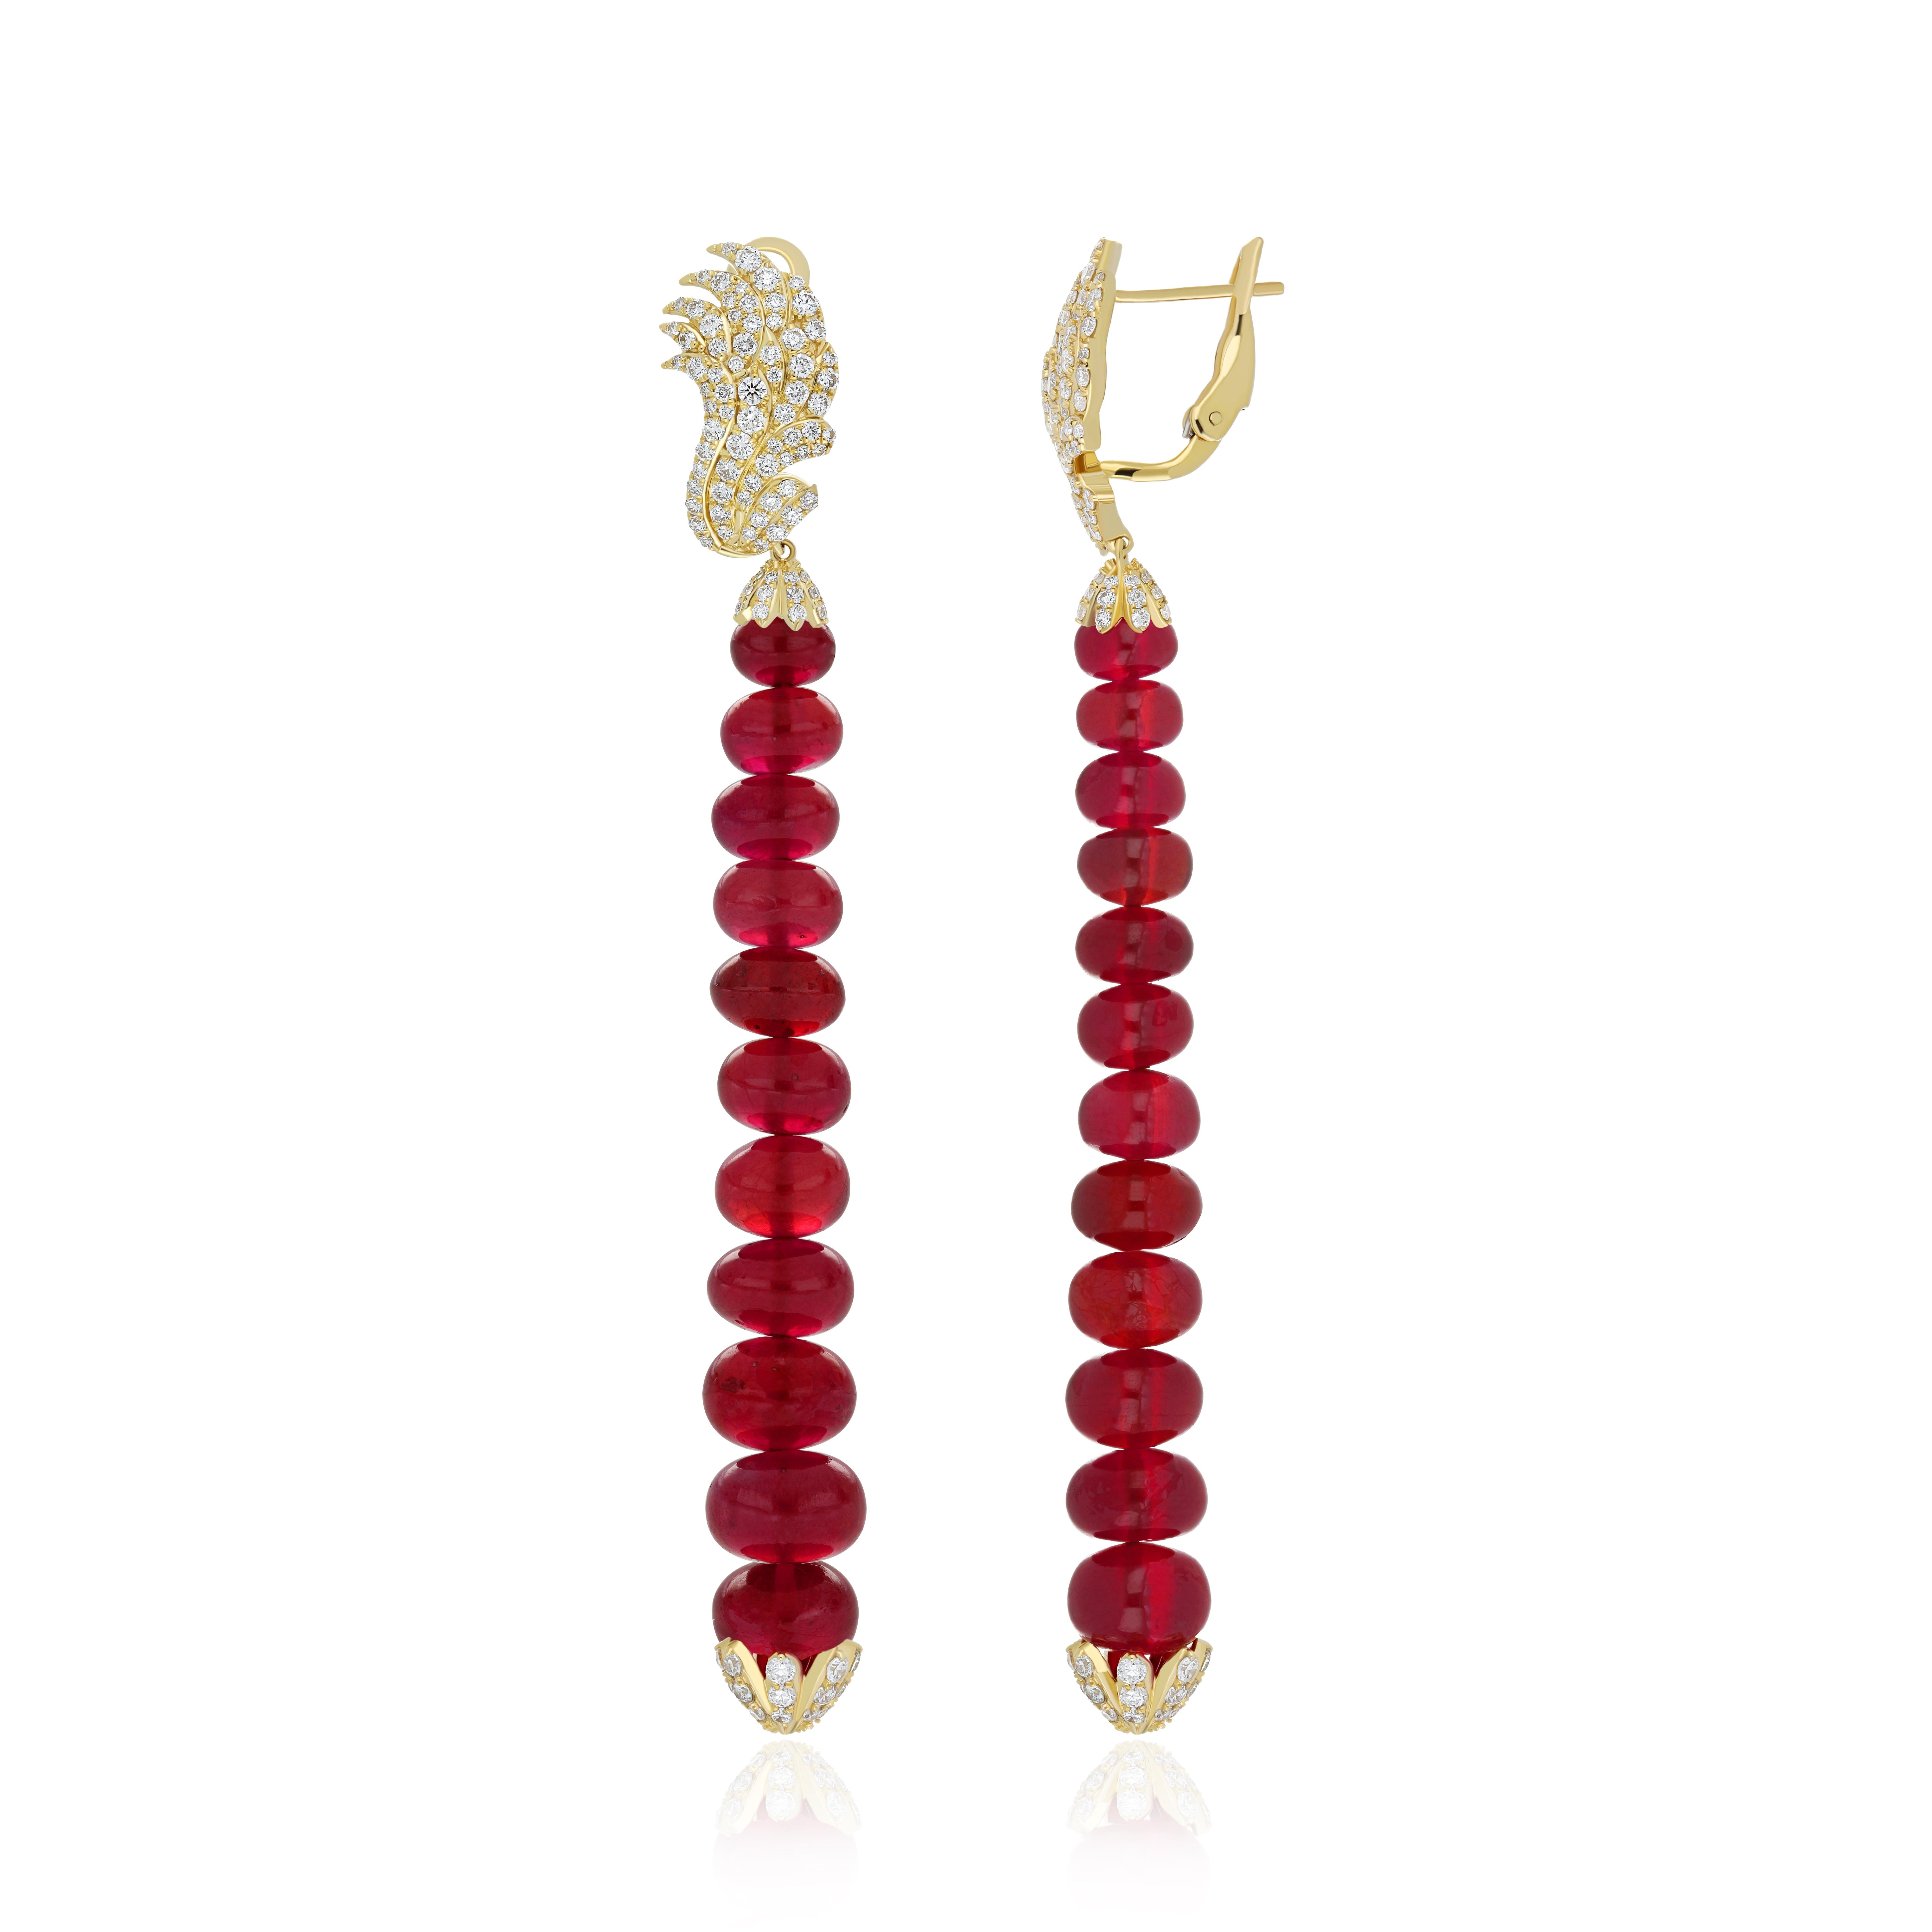 Elegant and Exquisitely Detailed 18 Karat Yellow Gold Earring. Set with Beautiful Red Ruby weighing approx. 59.95Cts, accented with micro pave set Diamonds approx. 1.86Cts a Beautifully Hand Crafted in 18 Karat Yellow Gold Drop Dangle Beads